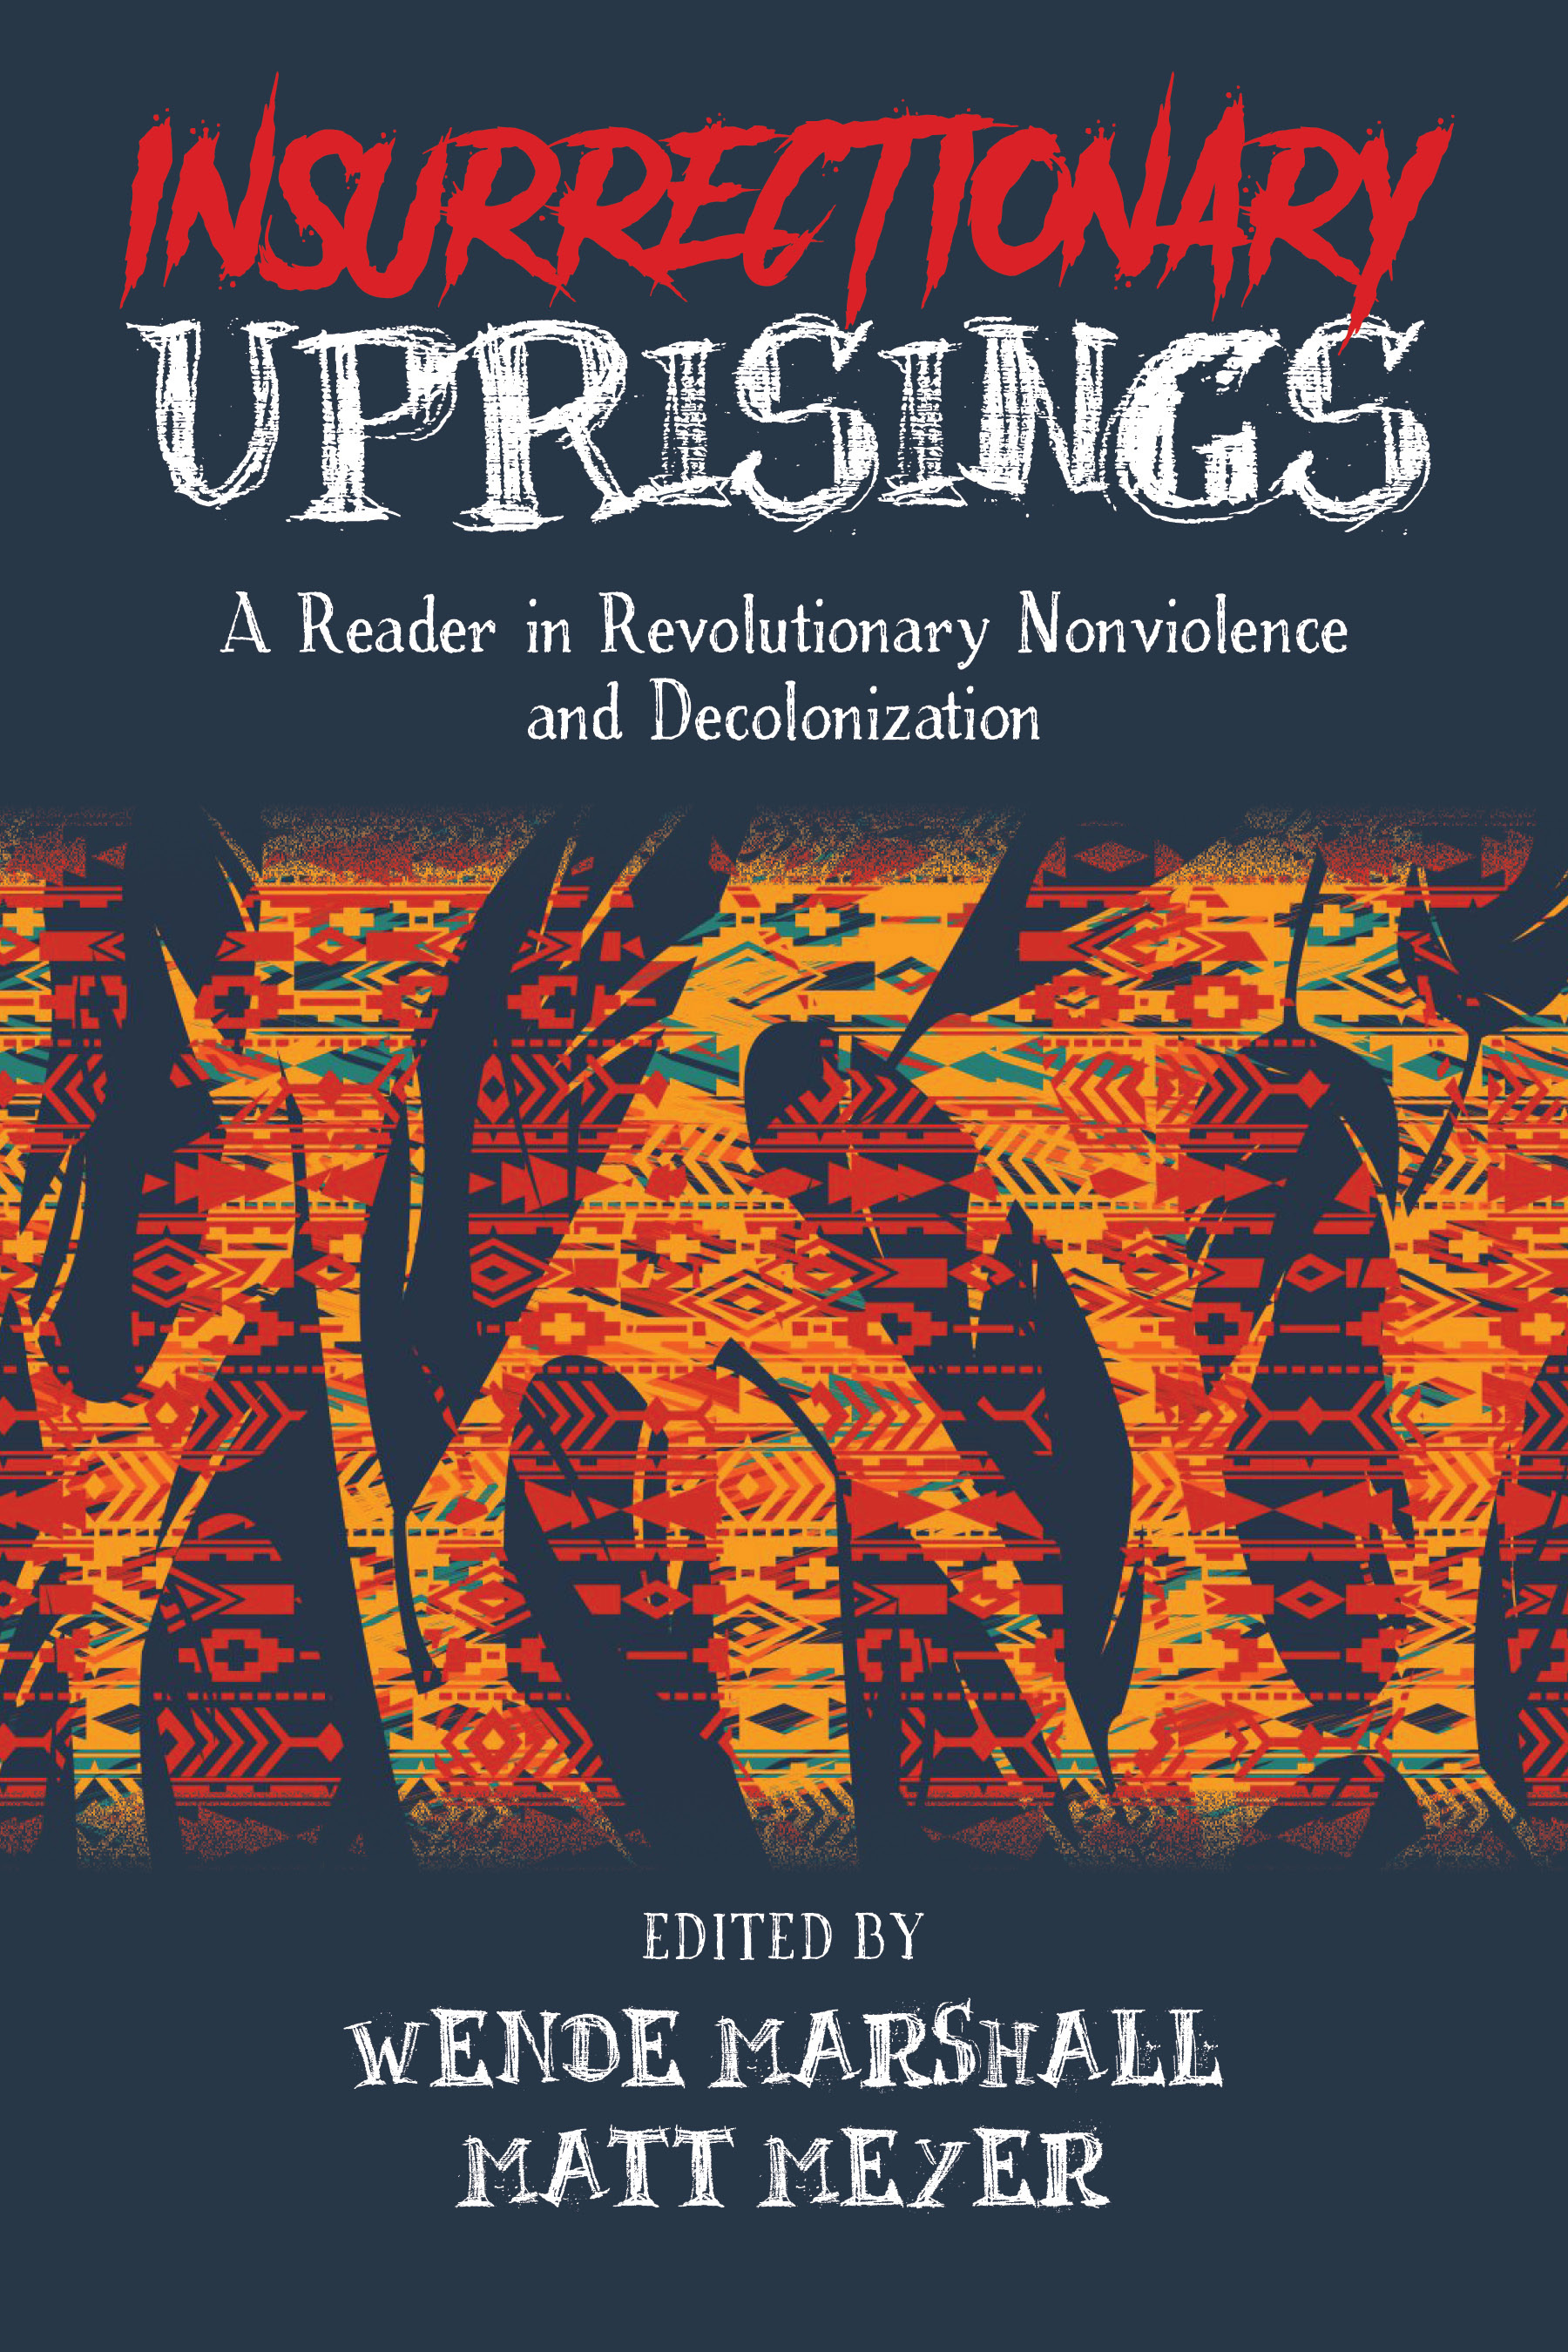 Insurrectionary Uprisings: A Reader in Revolutionary Nonviolence and Decolonization